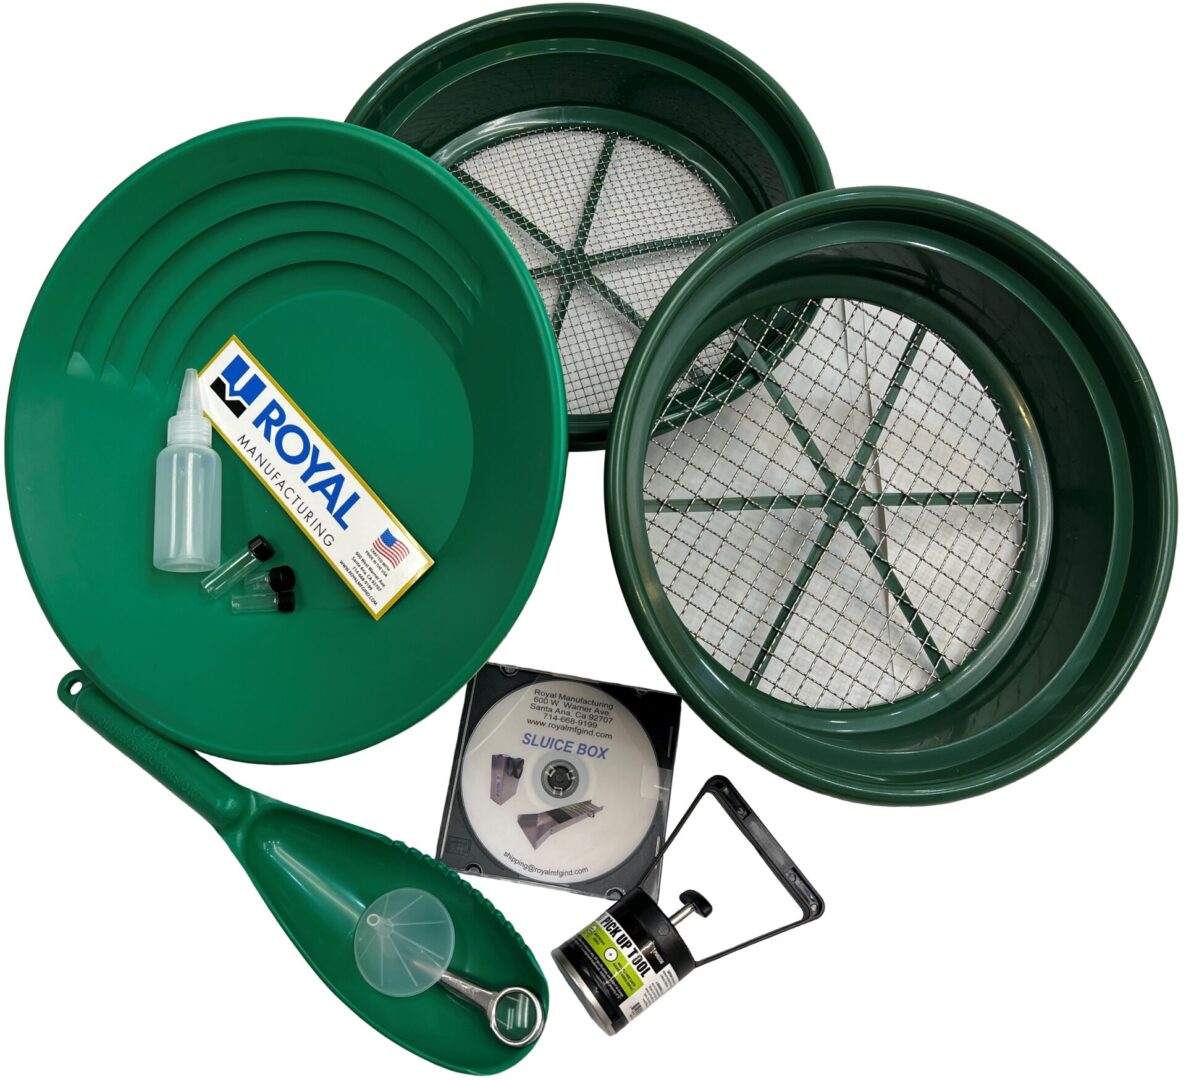 A green Royal Panning Kit with a sifter and other items.